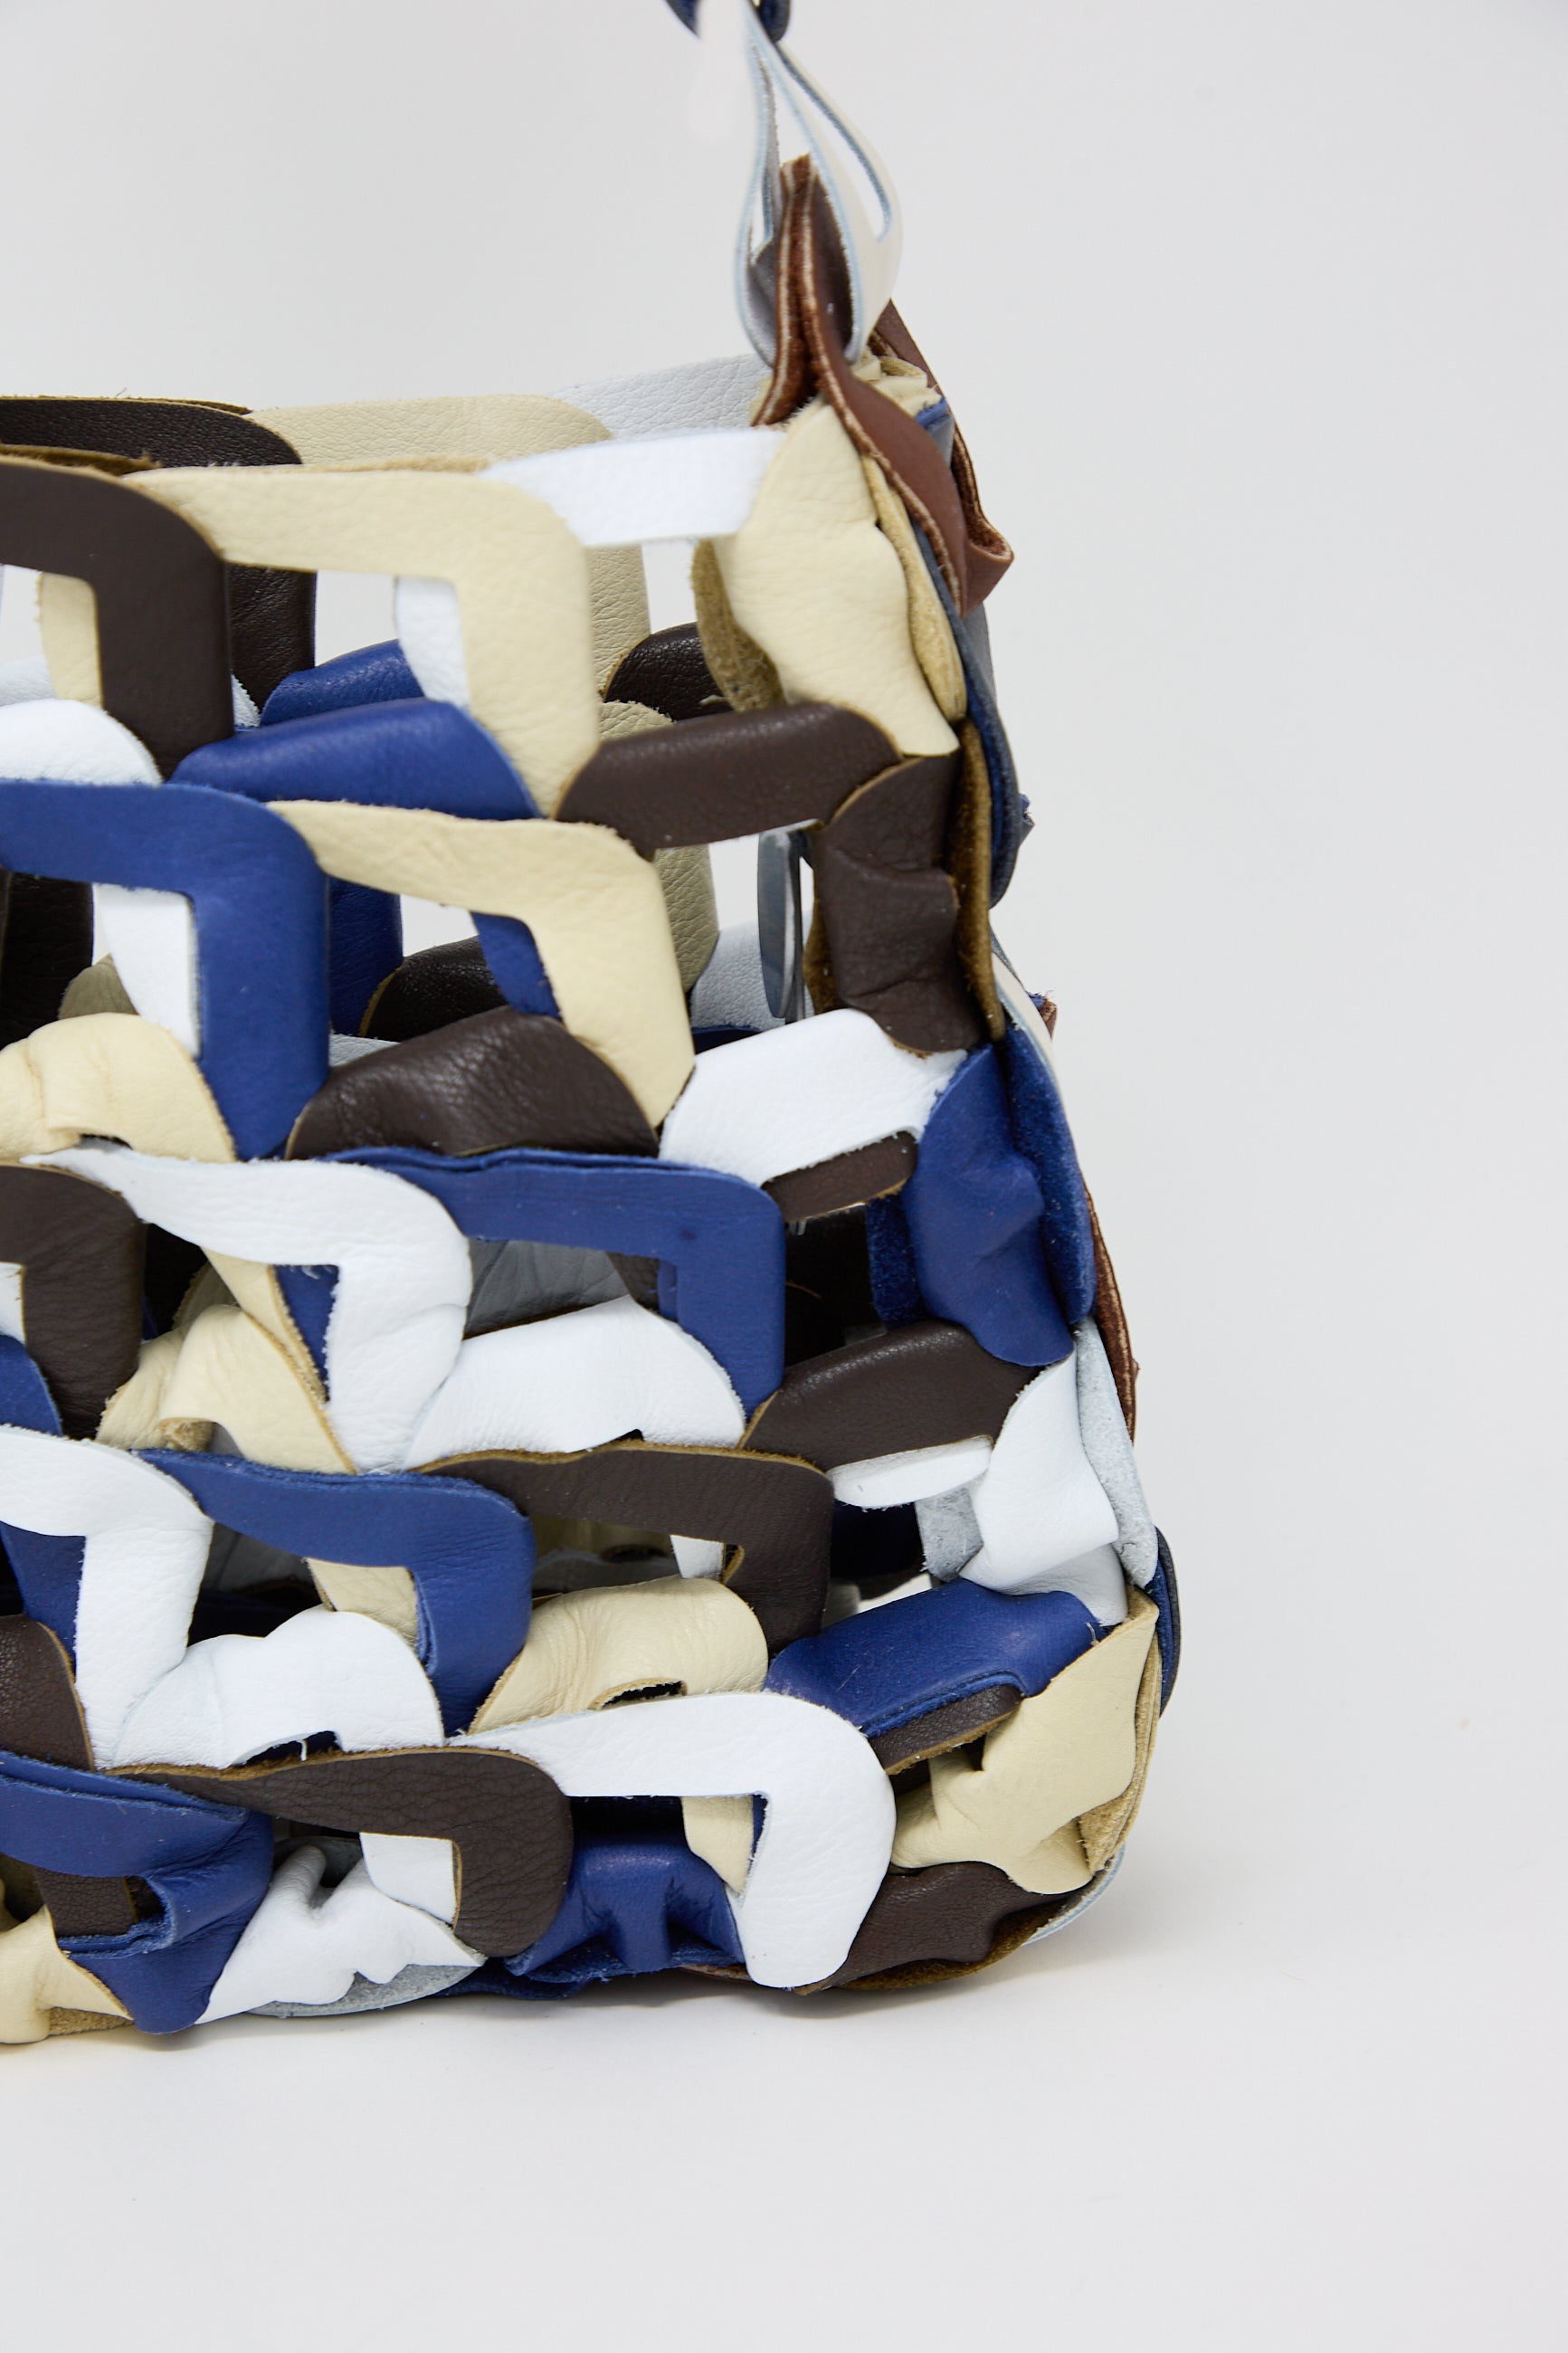 Close-up of a SC103 Leather Links Tote in Quill with interwoven leather strips in blue, white, and brown colors, against a neutral background.